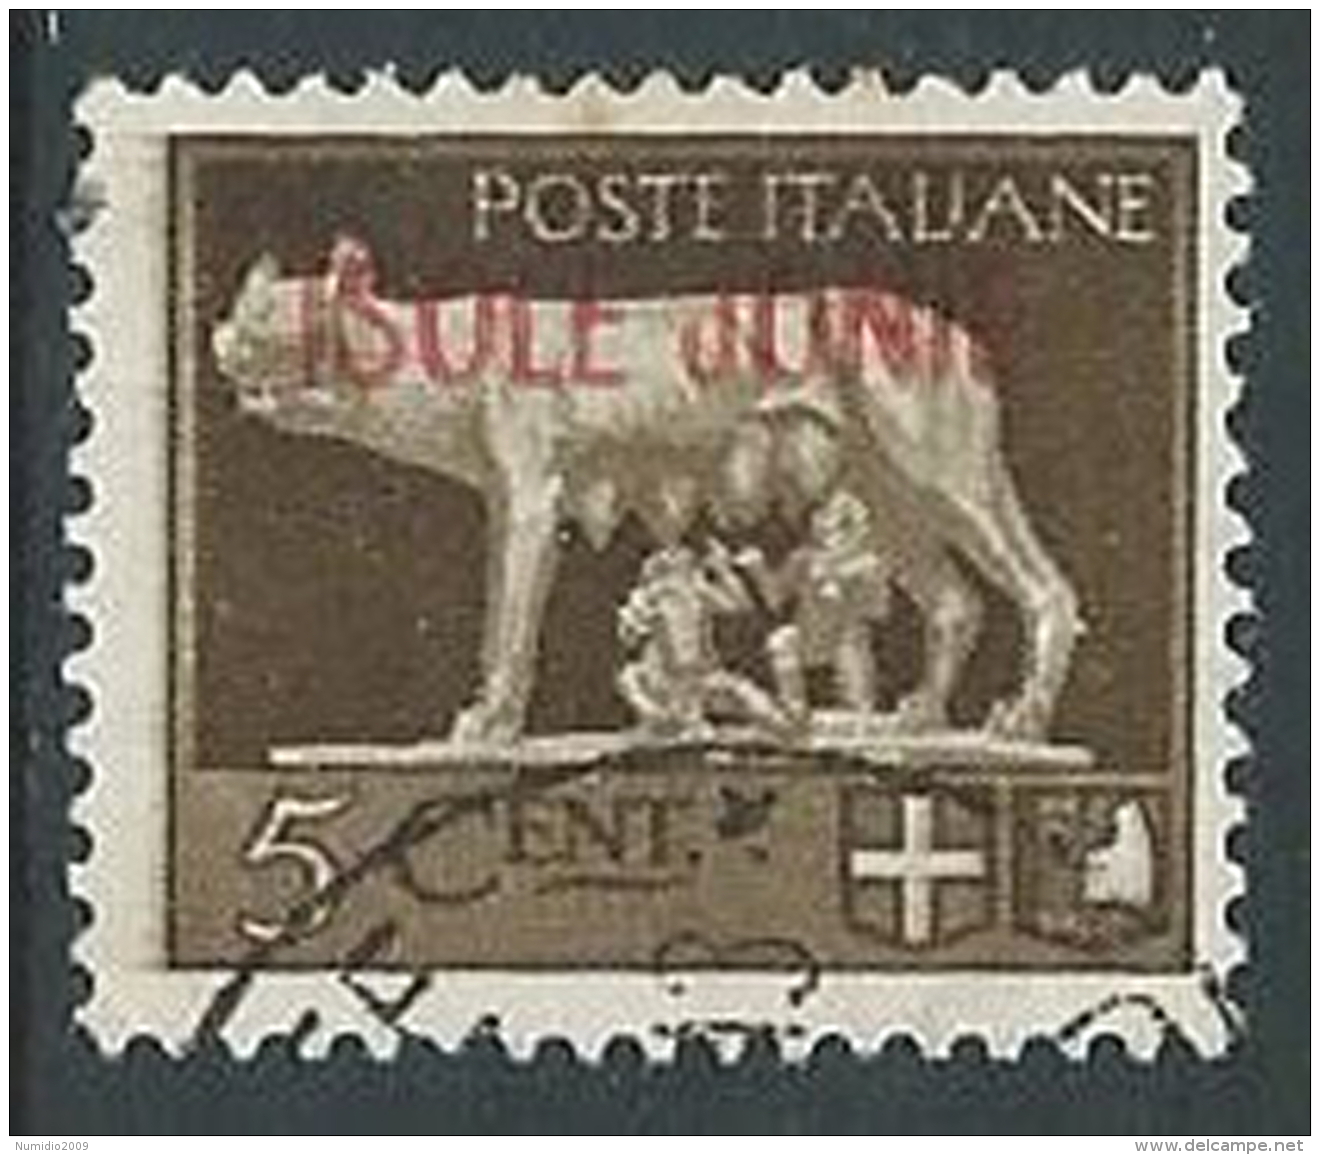 1941 ISOLE JONIE USATO LUPA 5 CENT - M25-2 - Îles Ioniennes